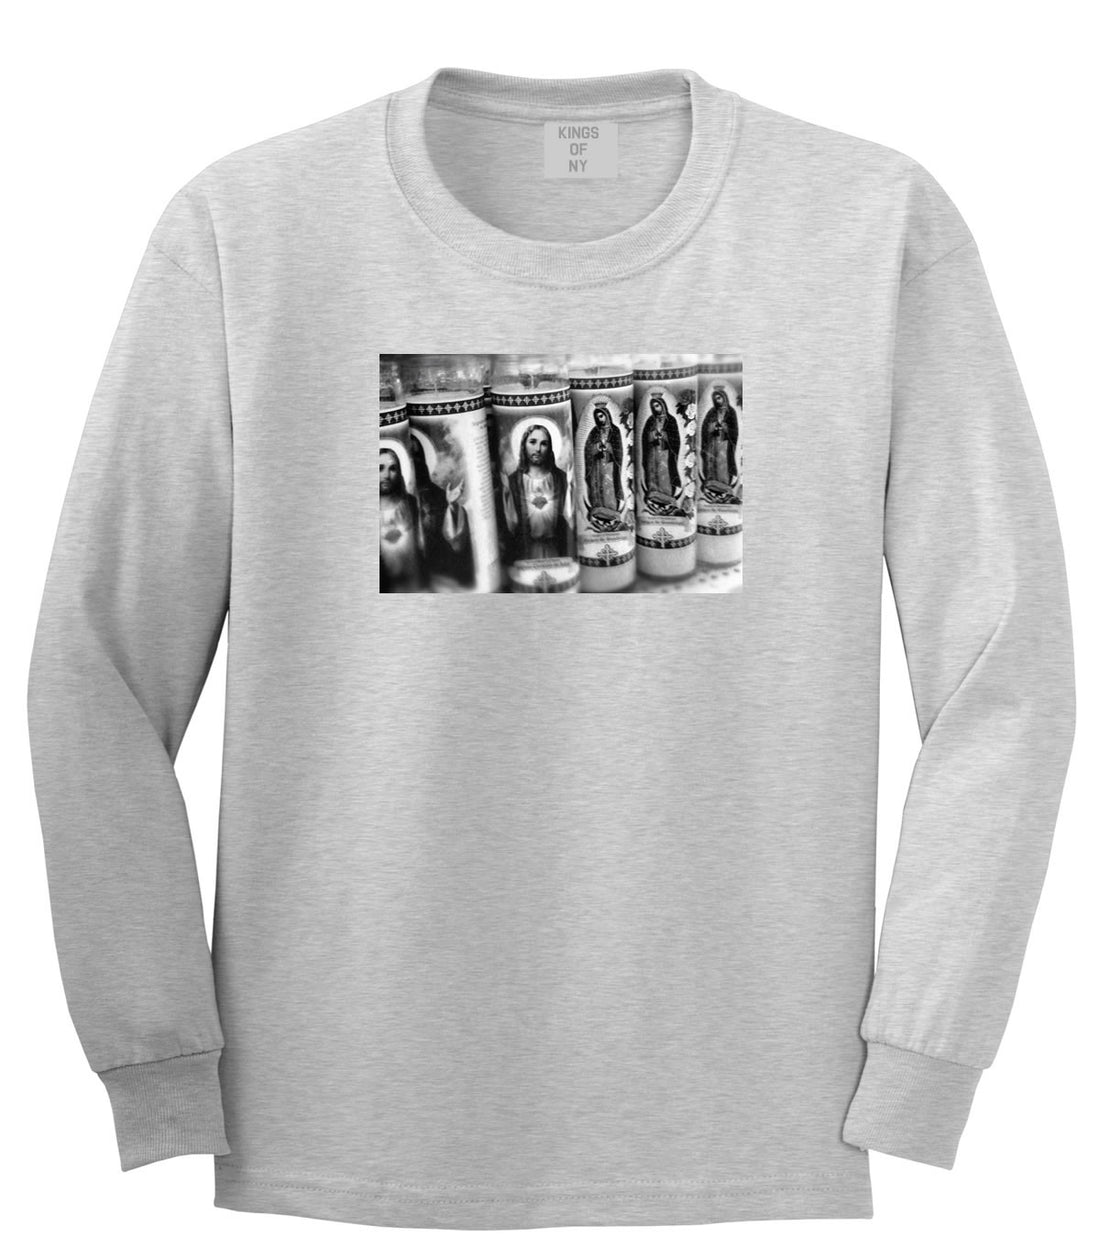 Candles Religious God Jesus Mary Fire NYC Long Sleeve T-Shirt In Grey by Kings Of NY